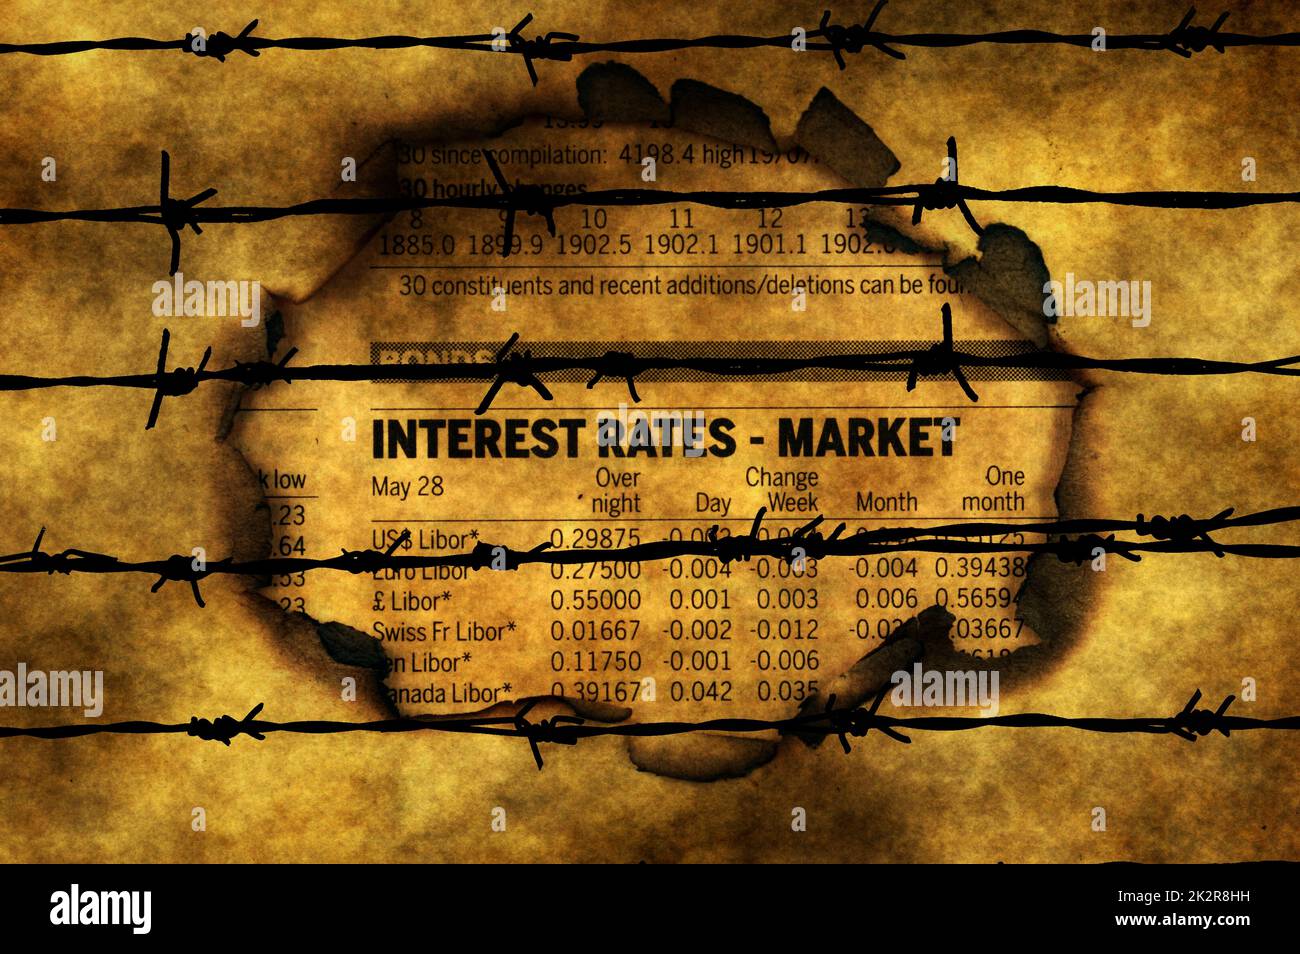 Interest rates - market against barbwire Stock Photo